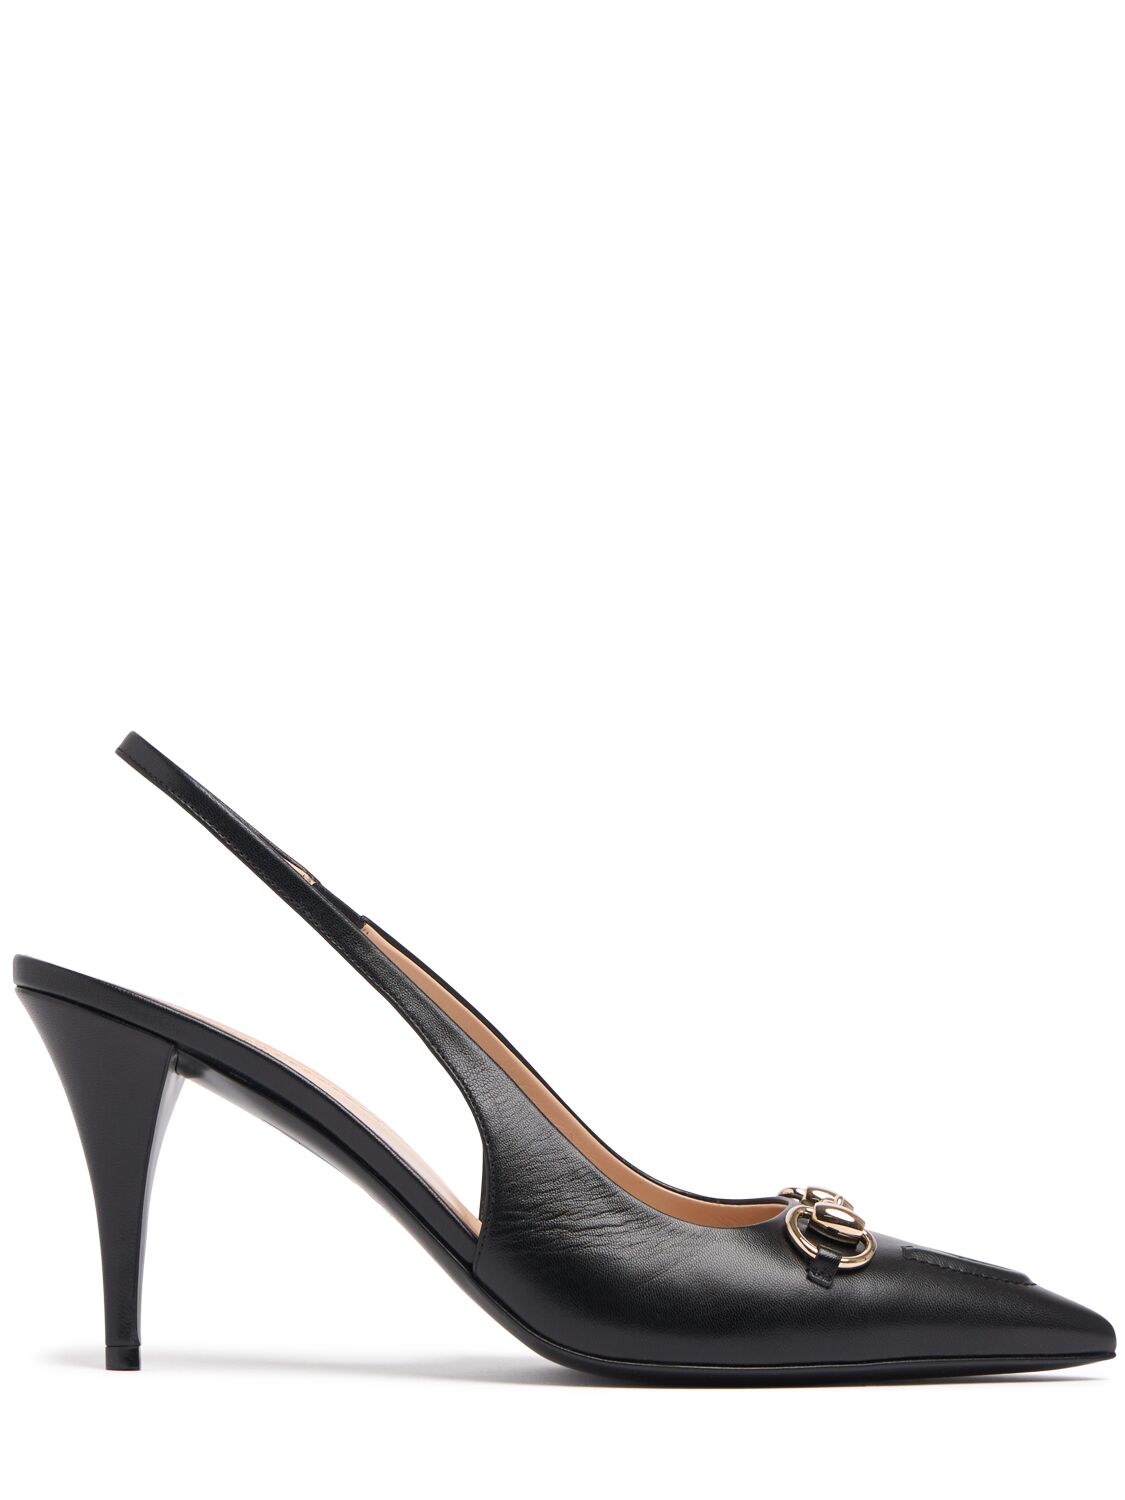 Gucci 85mm Erin Leather Slingback Pumps In Black